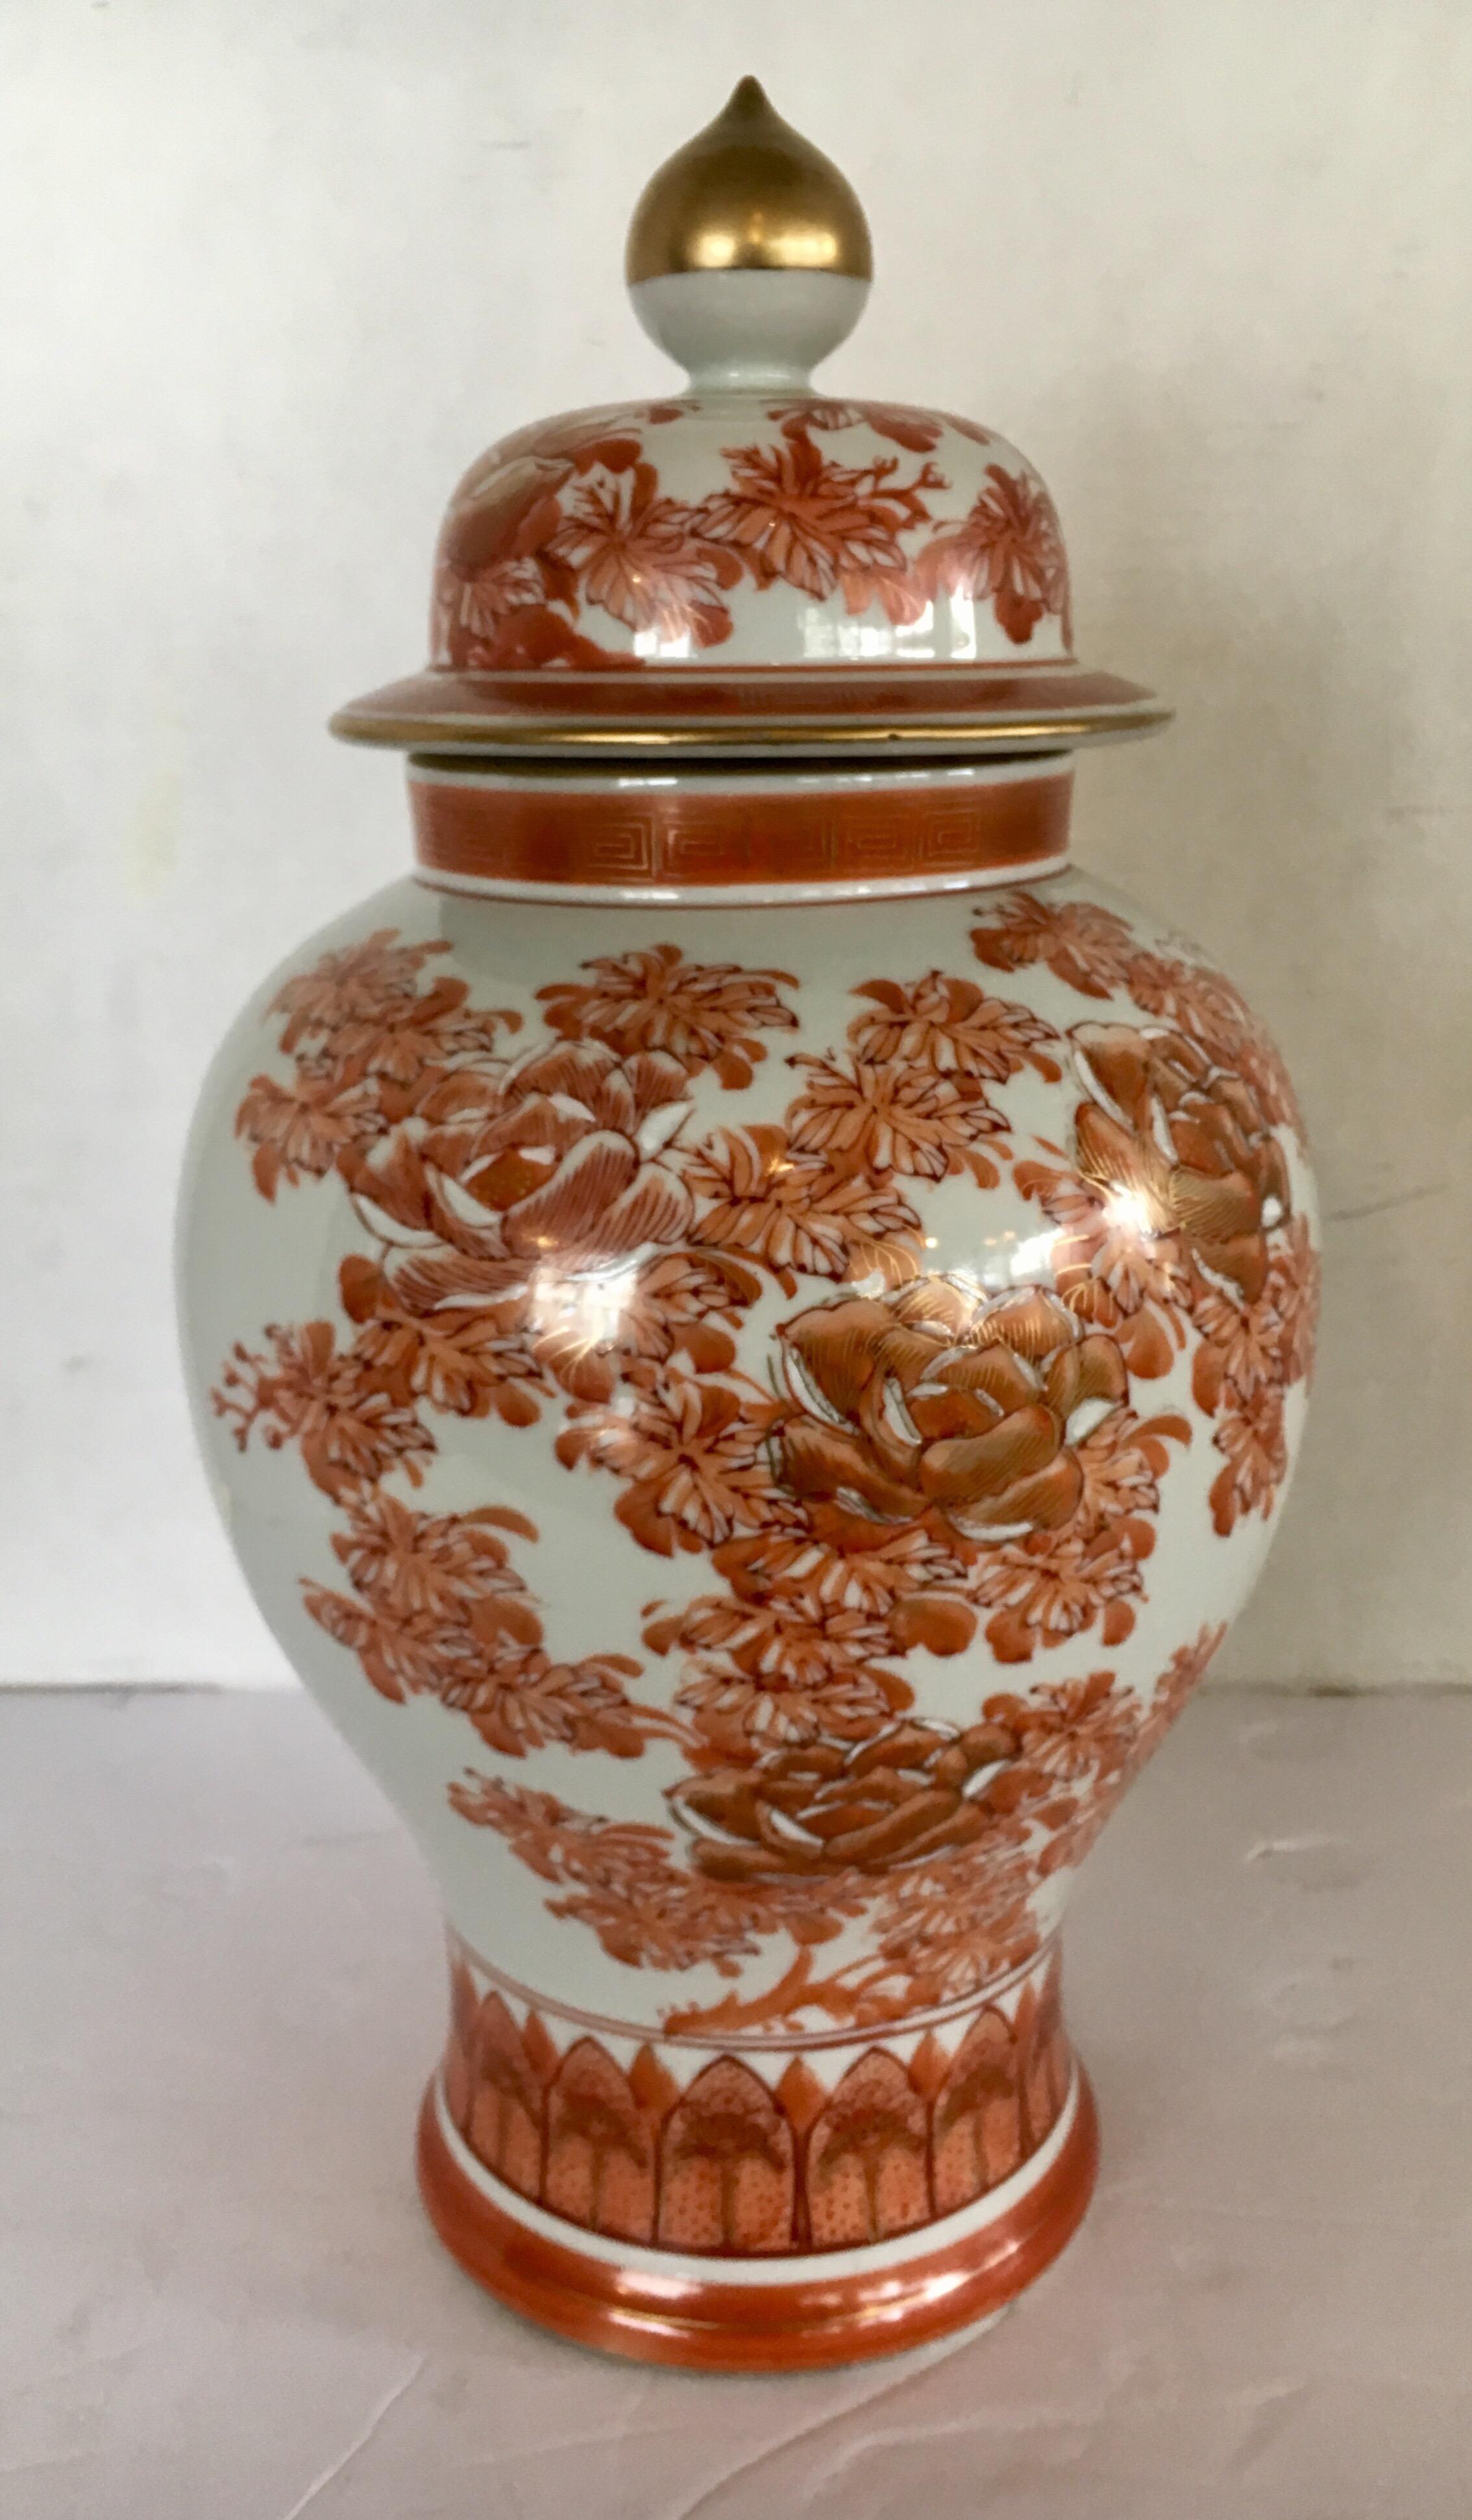 Japanese porcelain ginger jar with cover that has a painted Hermes orange motif on white ground. Signed on the bottom.